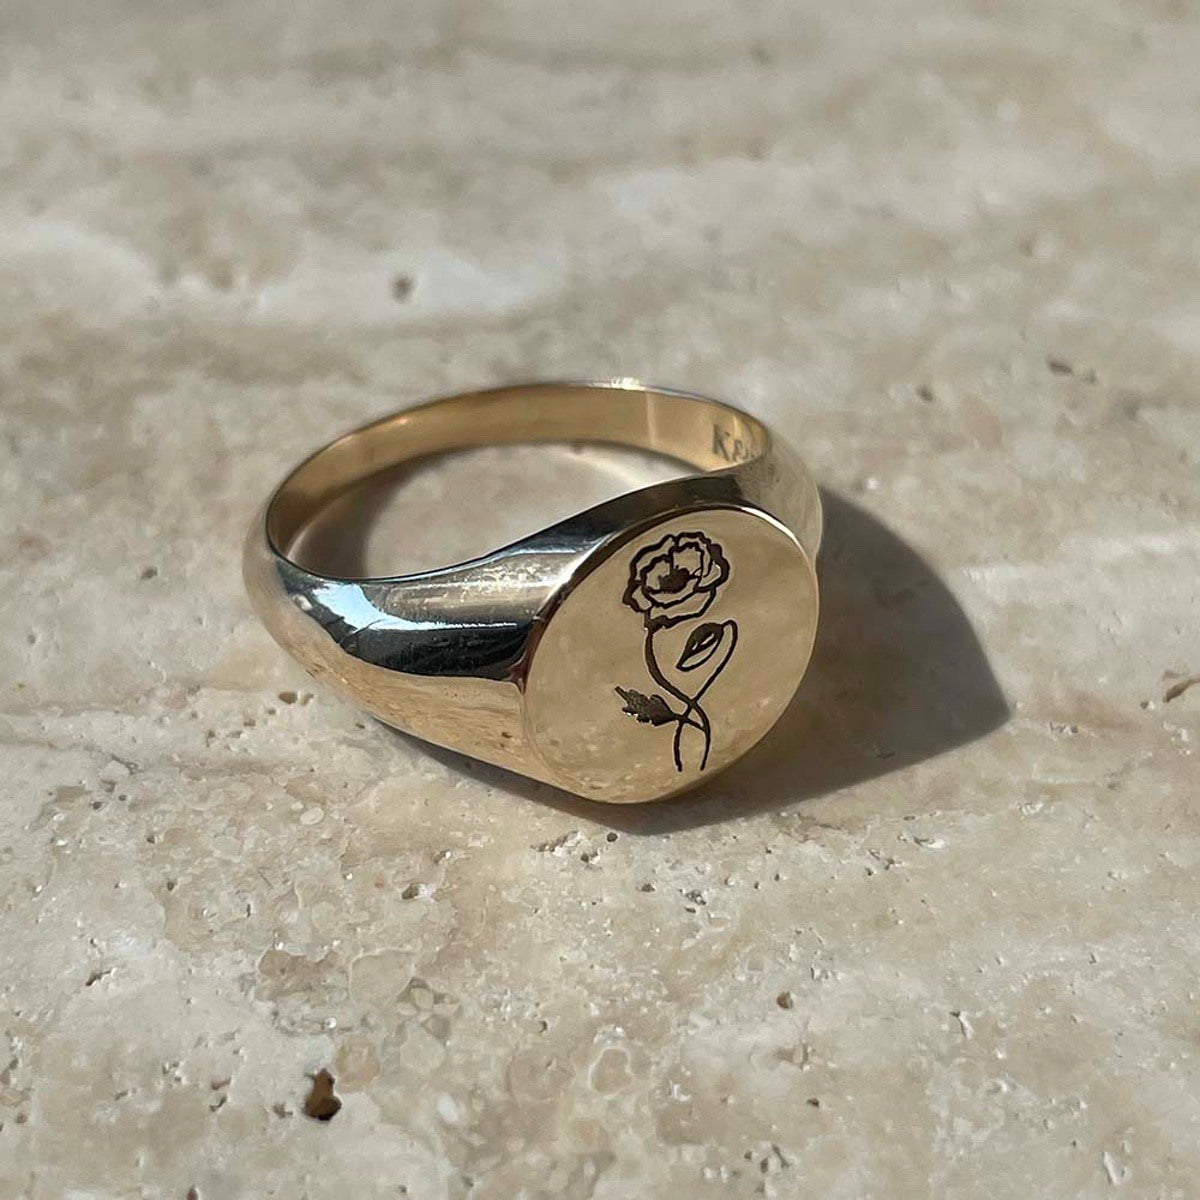 Round solid gold signet ring with an engraved rose on the face. Add a date, initials, images or words in a bespoke style to our customisable products. Choose from single letter (for tiny beads and charms) or multiple letters for dates and words.